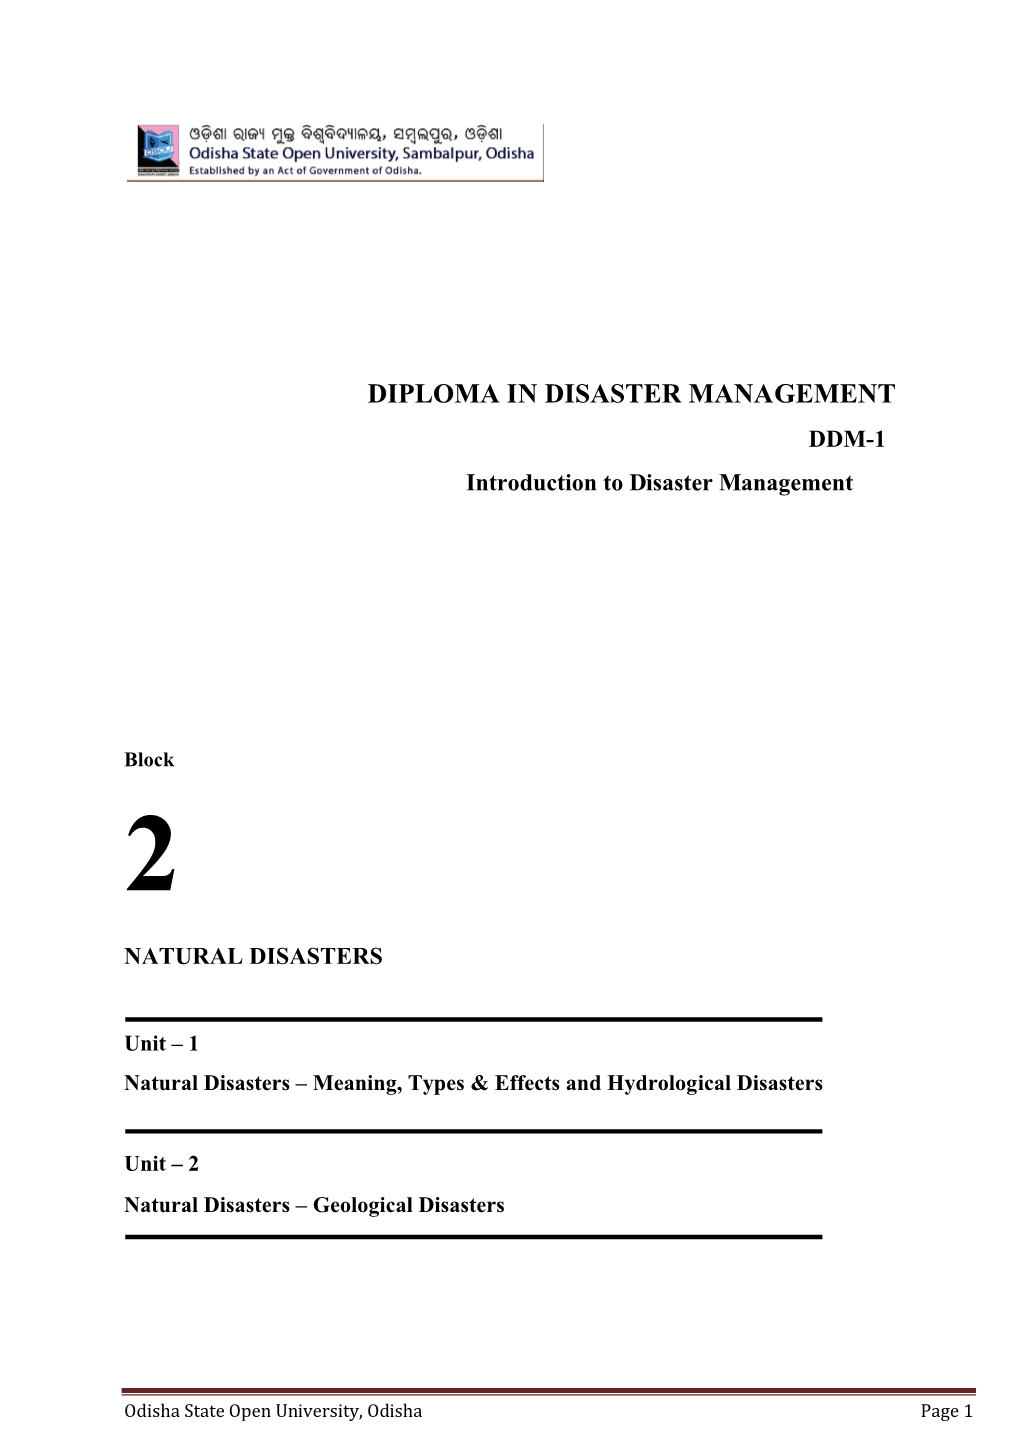 DIPLOMA in DISASTER MANAGEMENT DDM-1 Introduction to Disaster Management